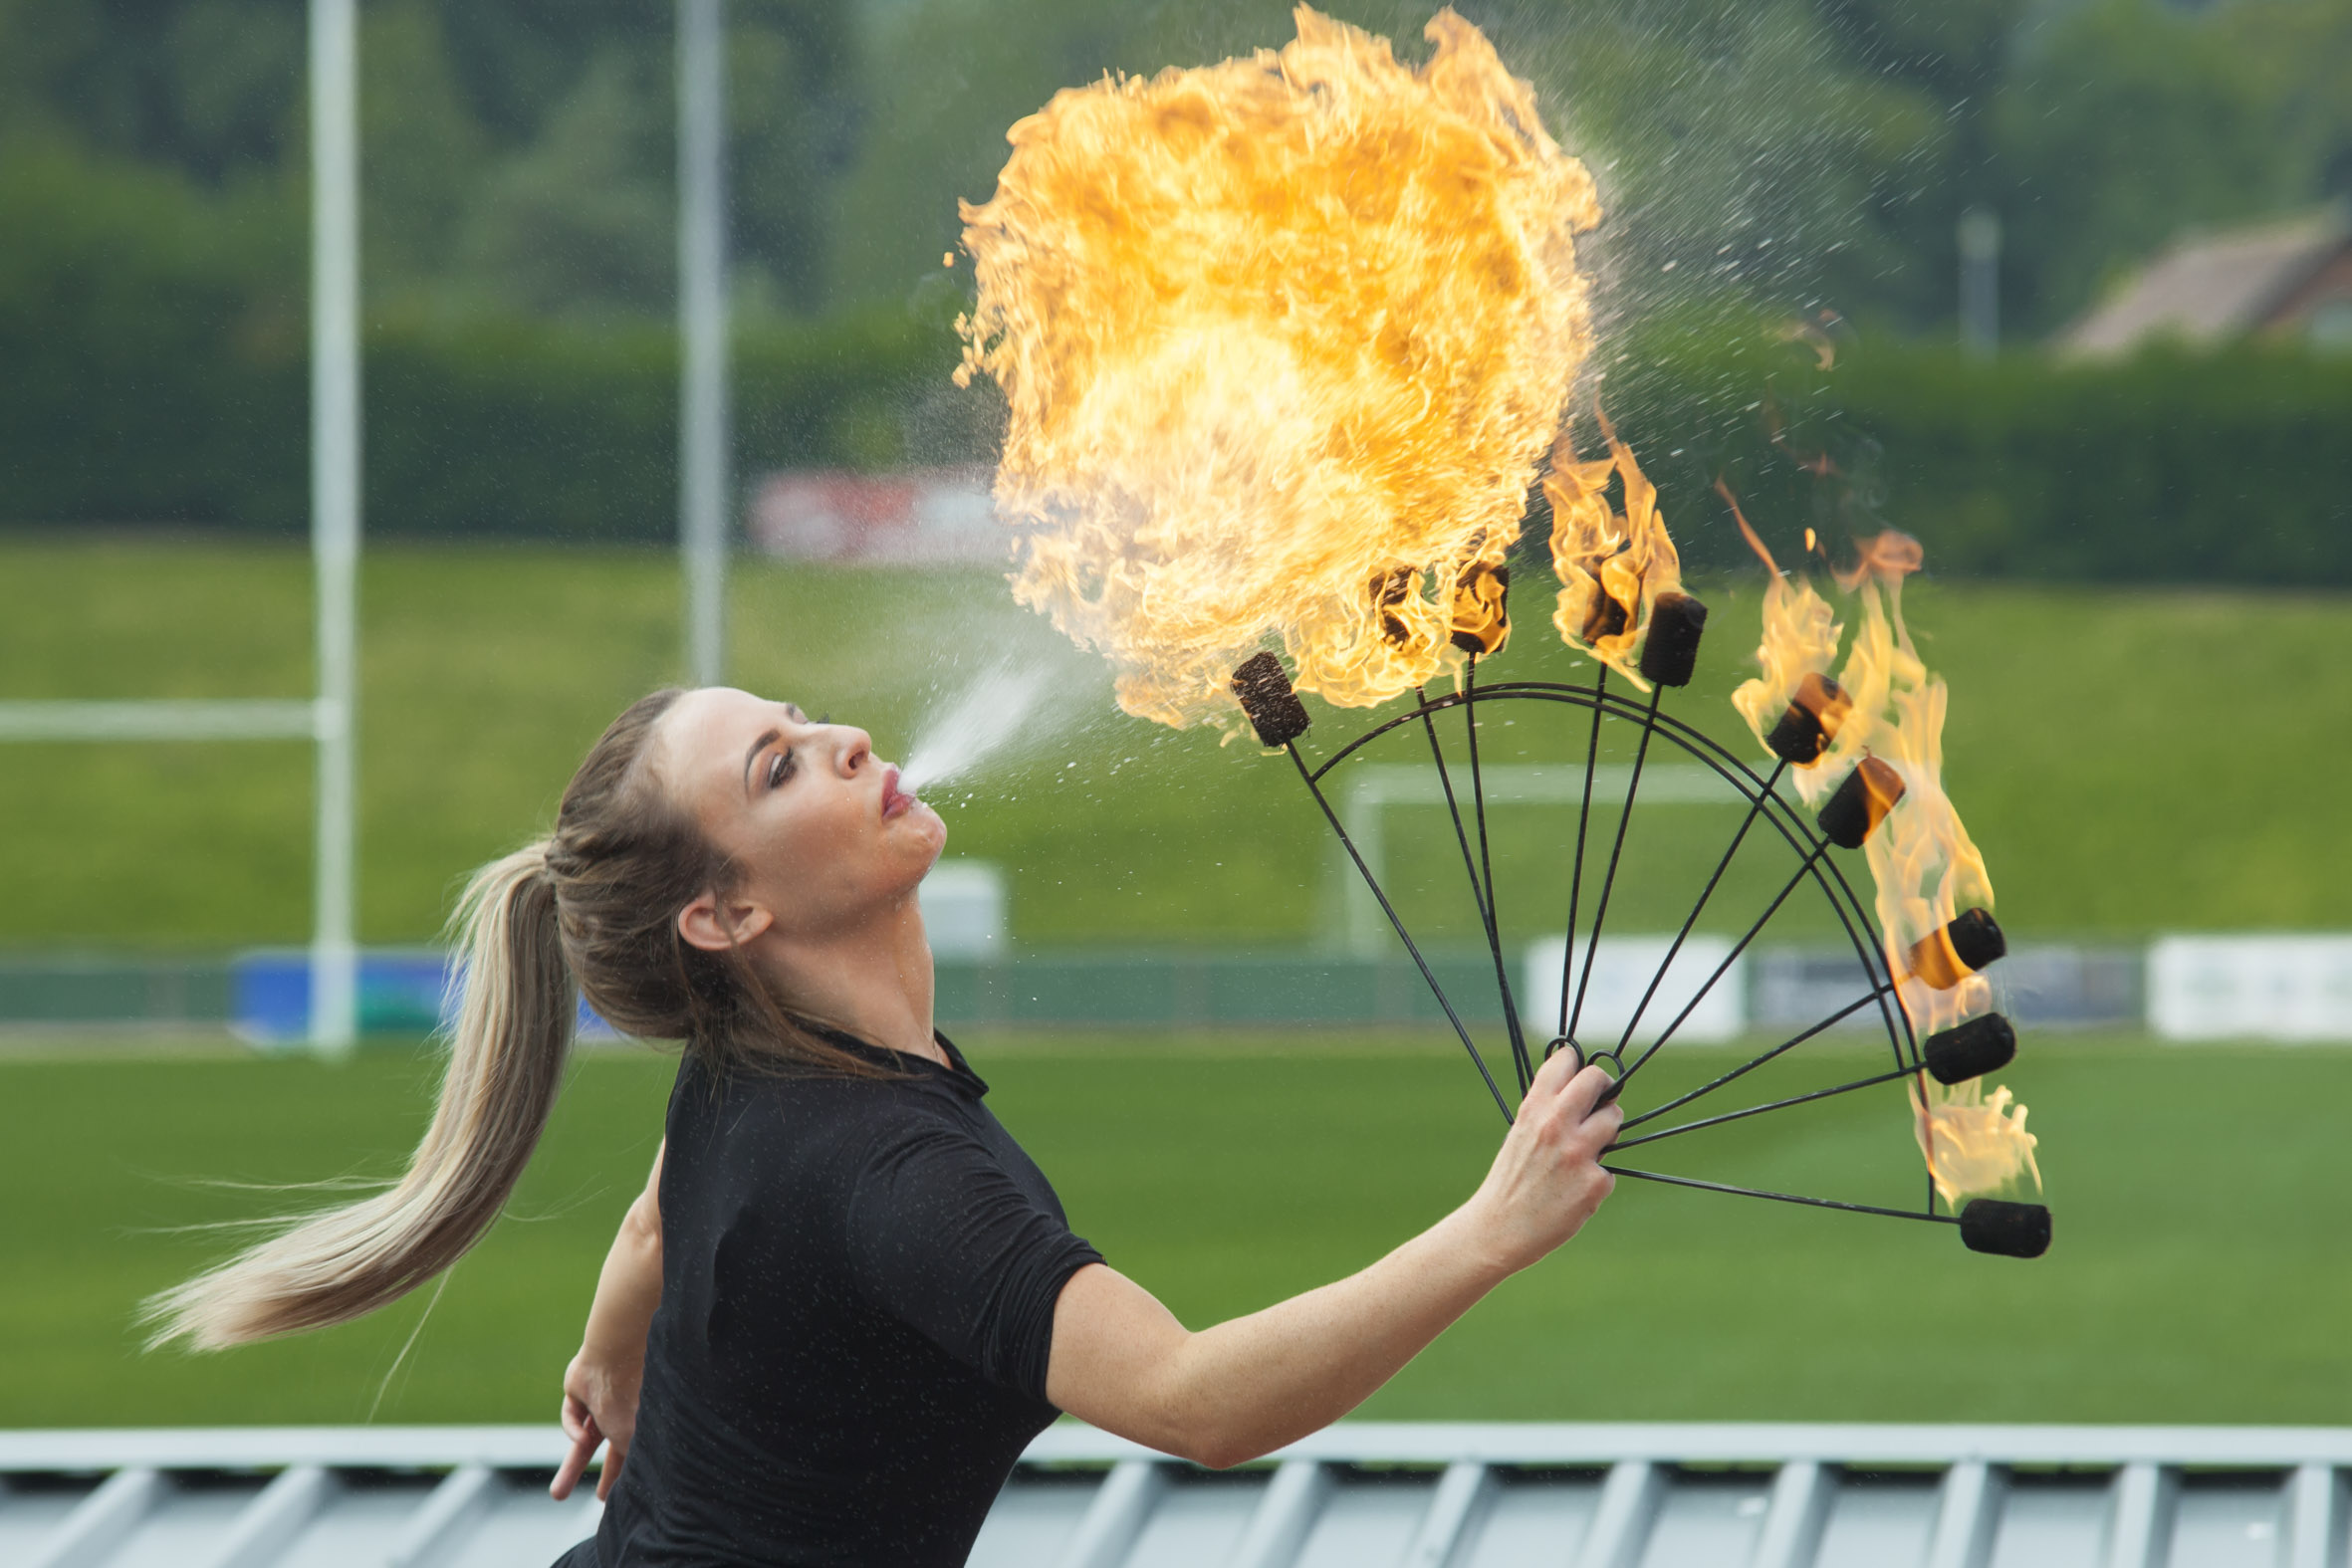 Fire eaters turn up the heat at Big Day Out